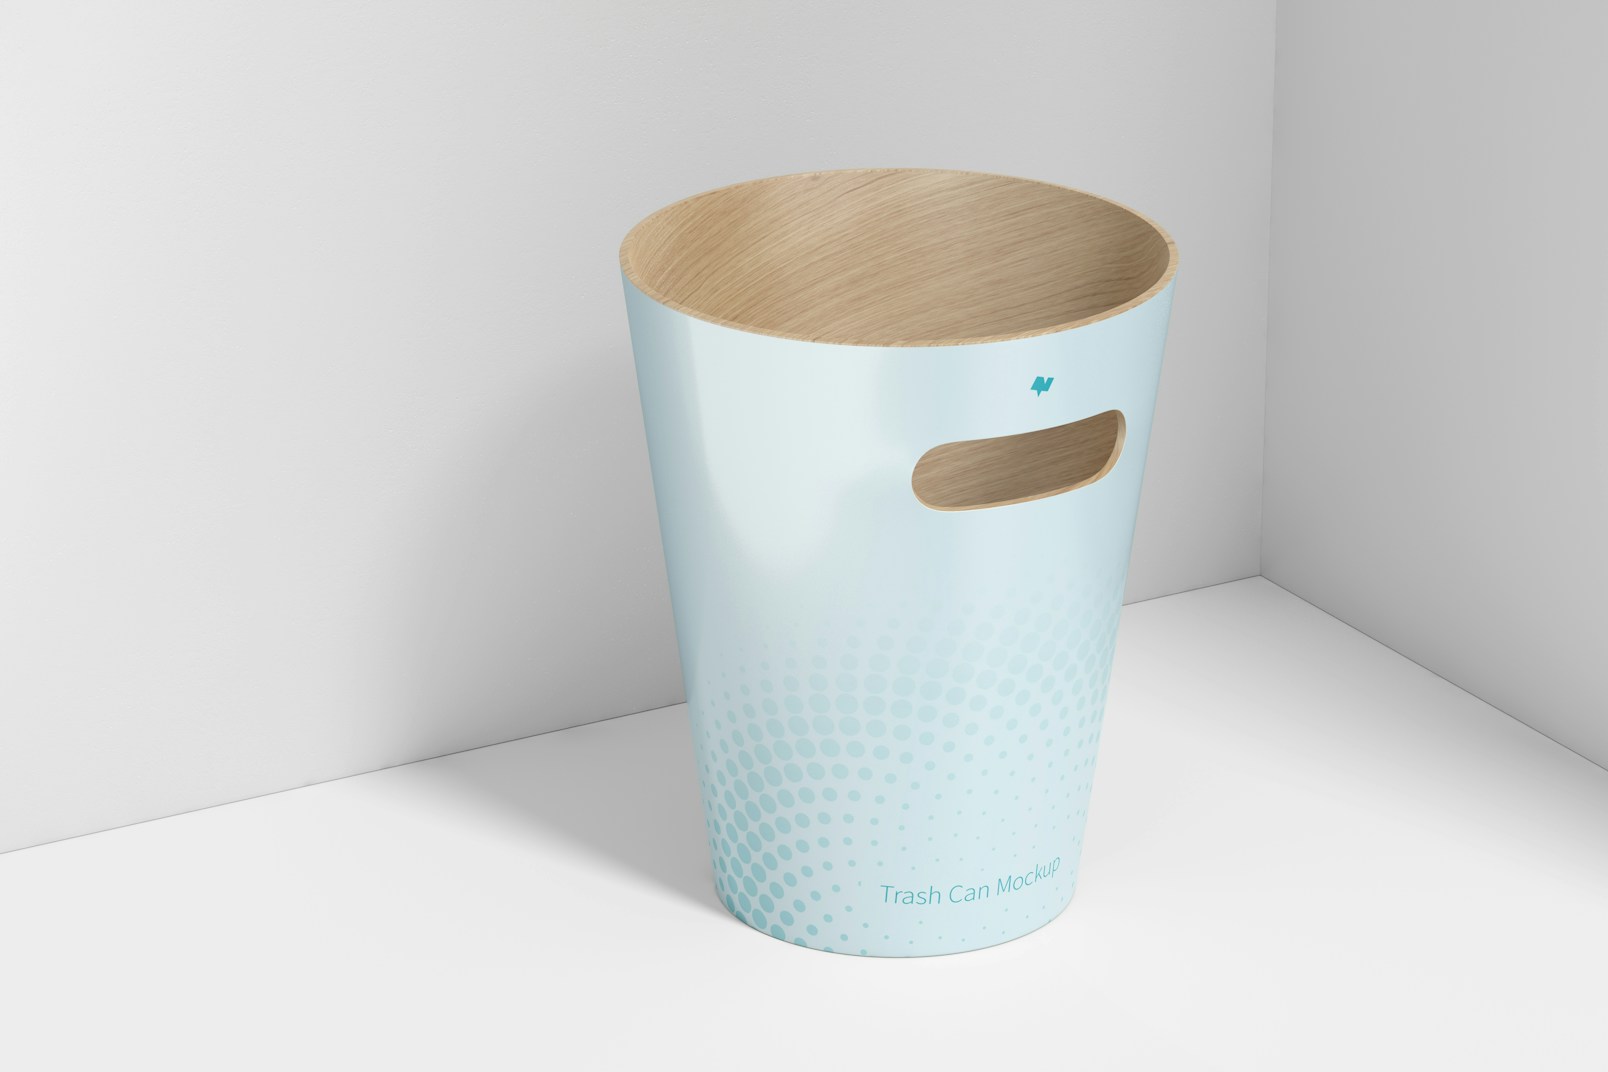 Wood Trash Can Mockup, Perspective View